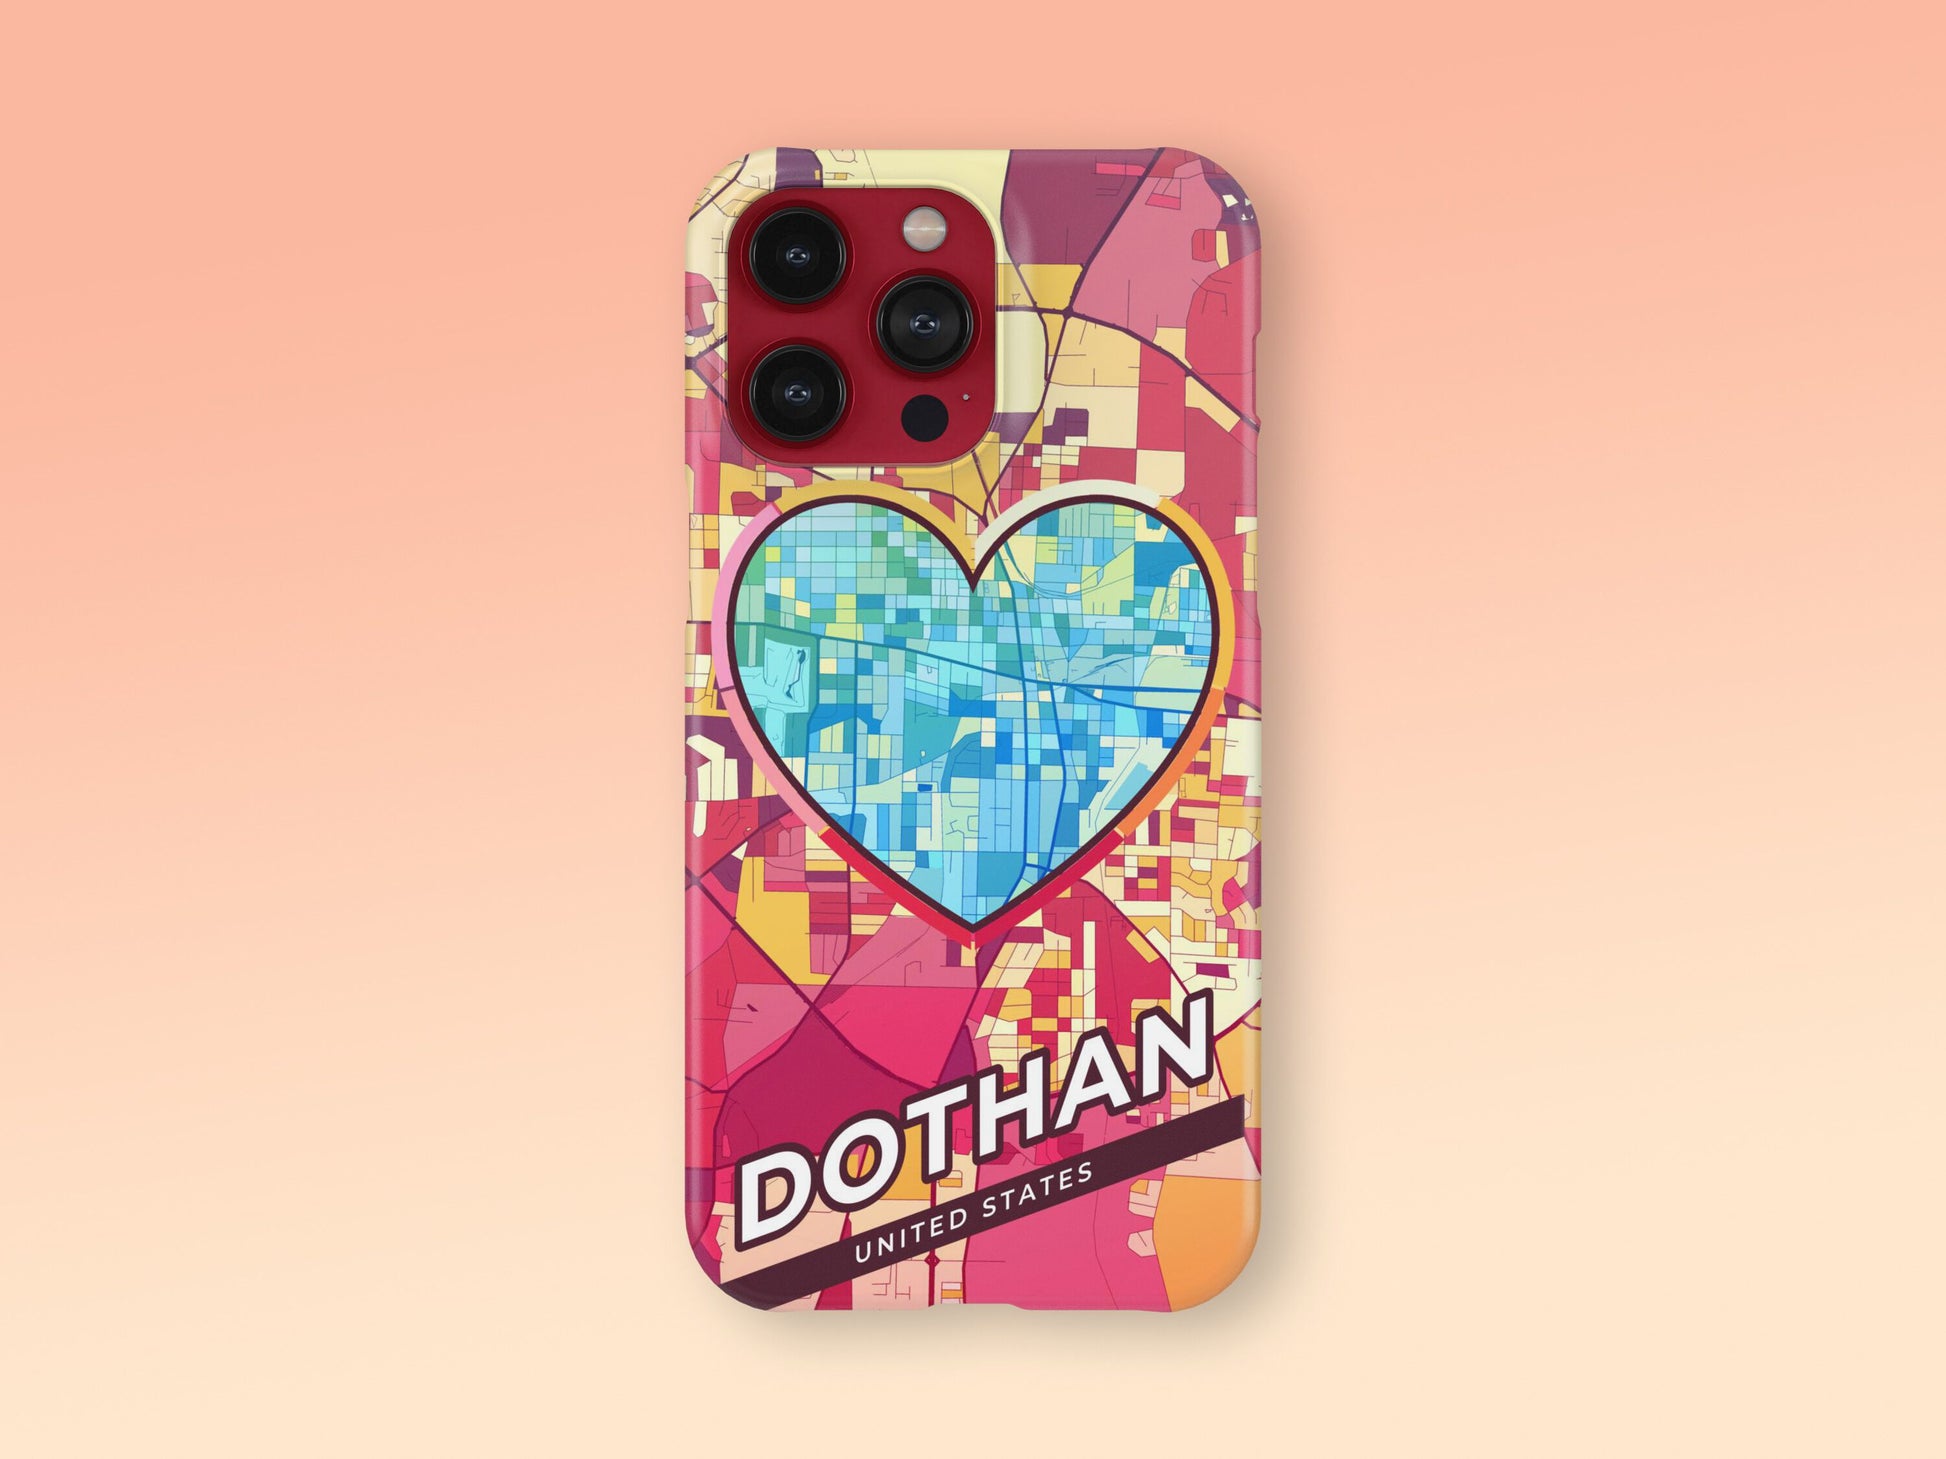 Dothan Alabama slim phone case with colorful icon. Birthday, wedding or housewarming gift. Couple match cases. 2